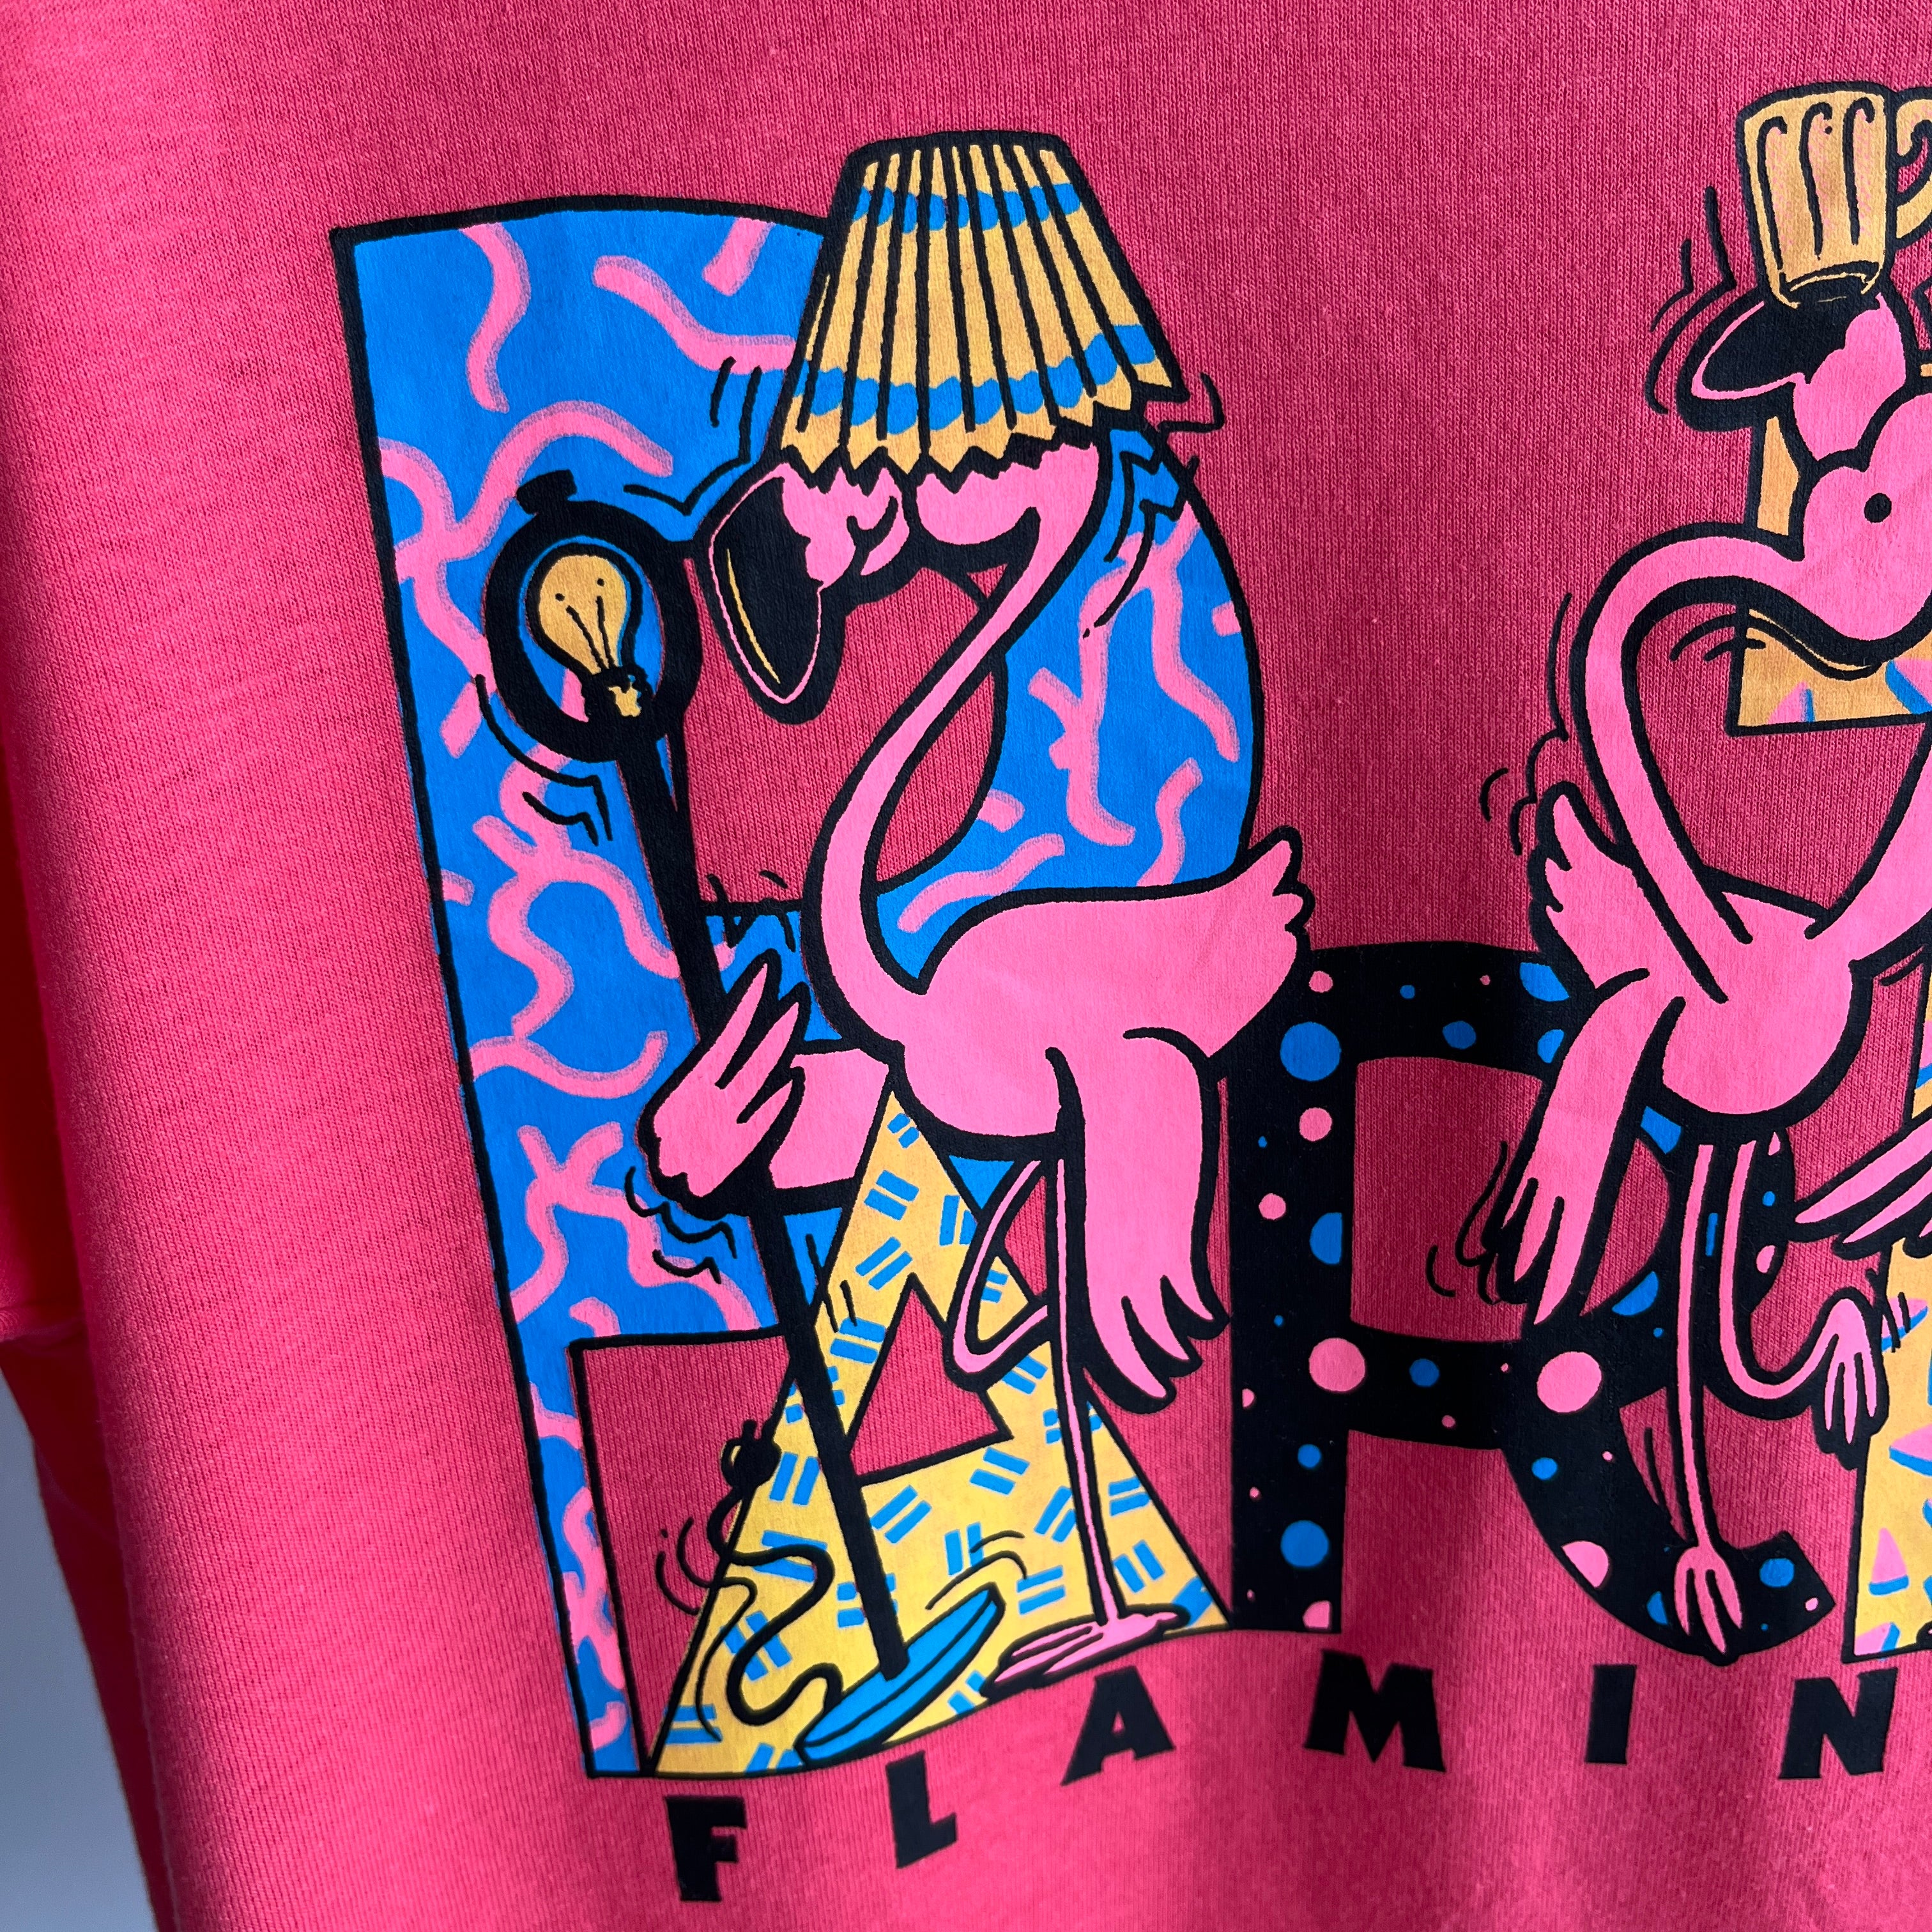 1889 Flamingo Party T-Shirt, Yes, That's Right